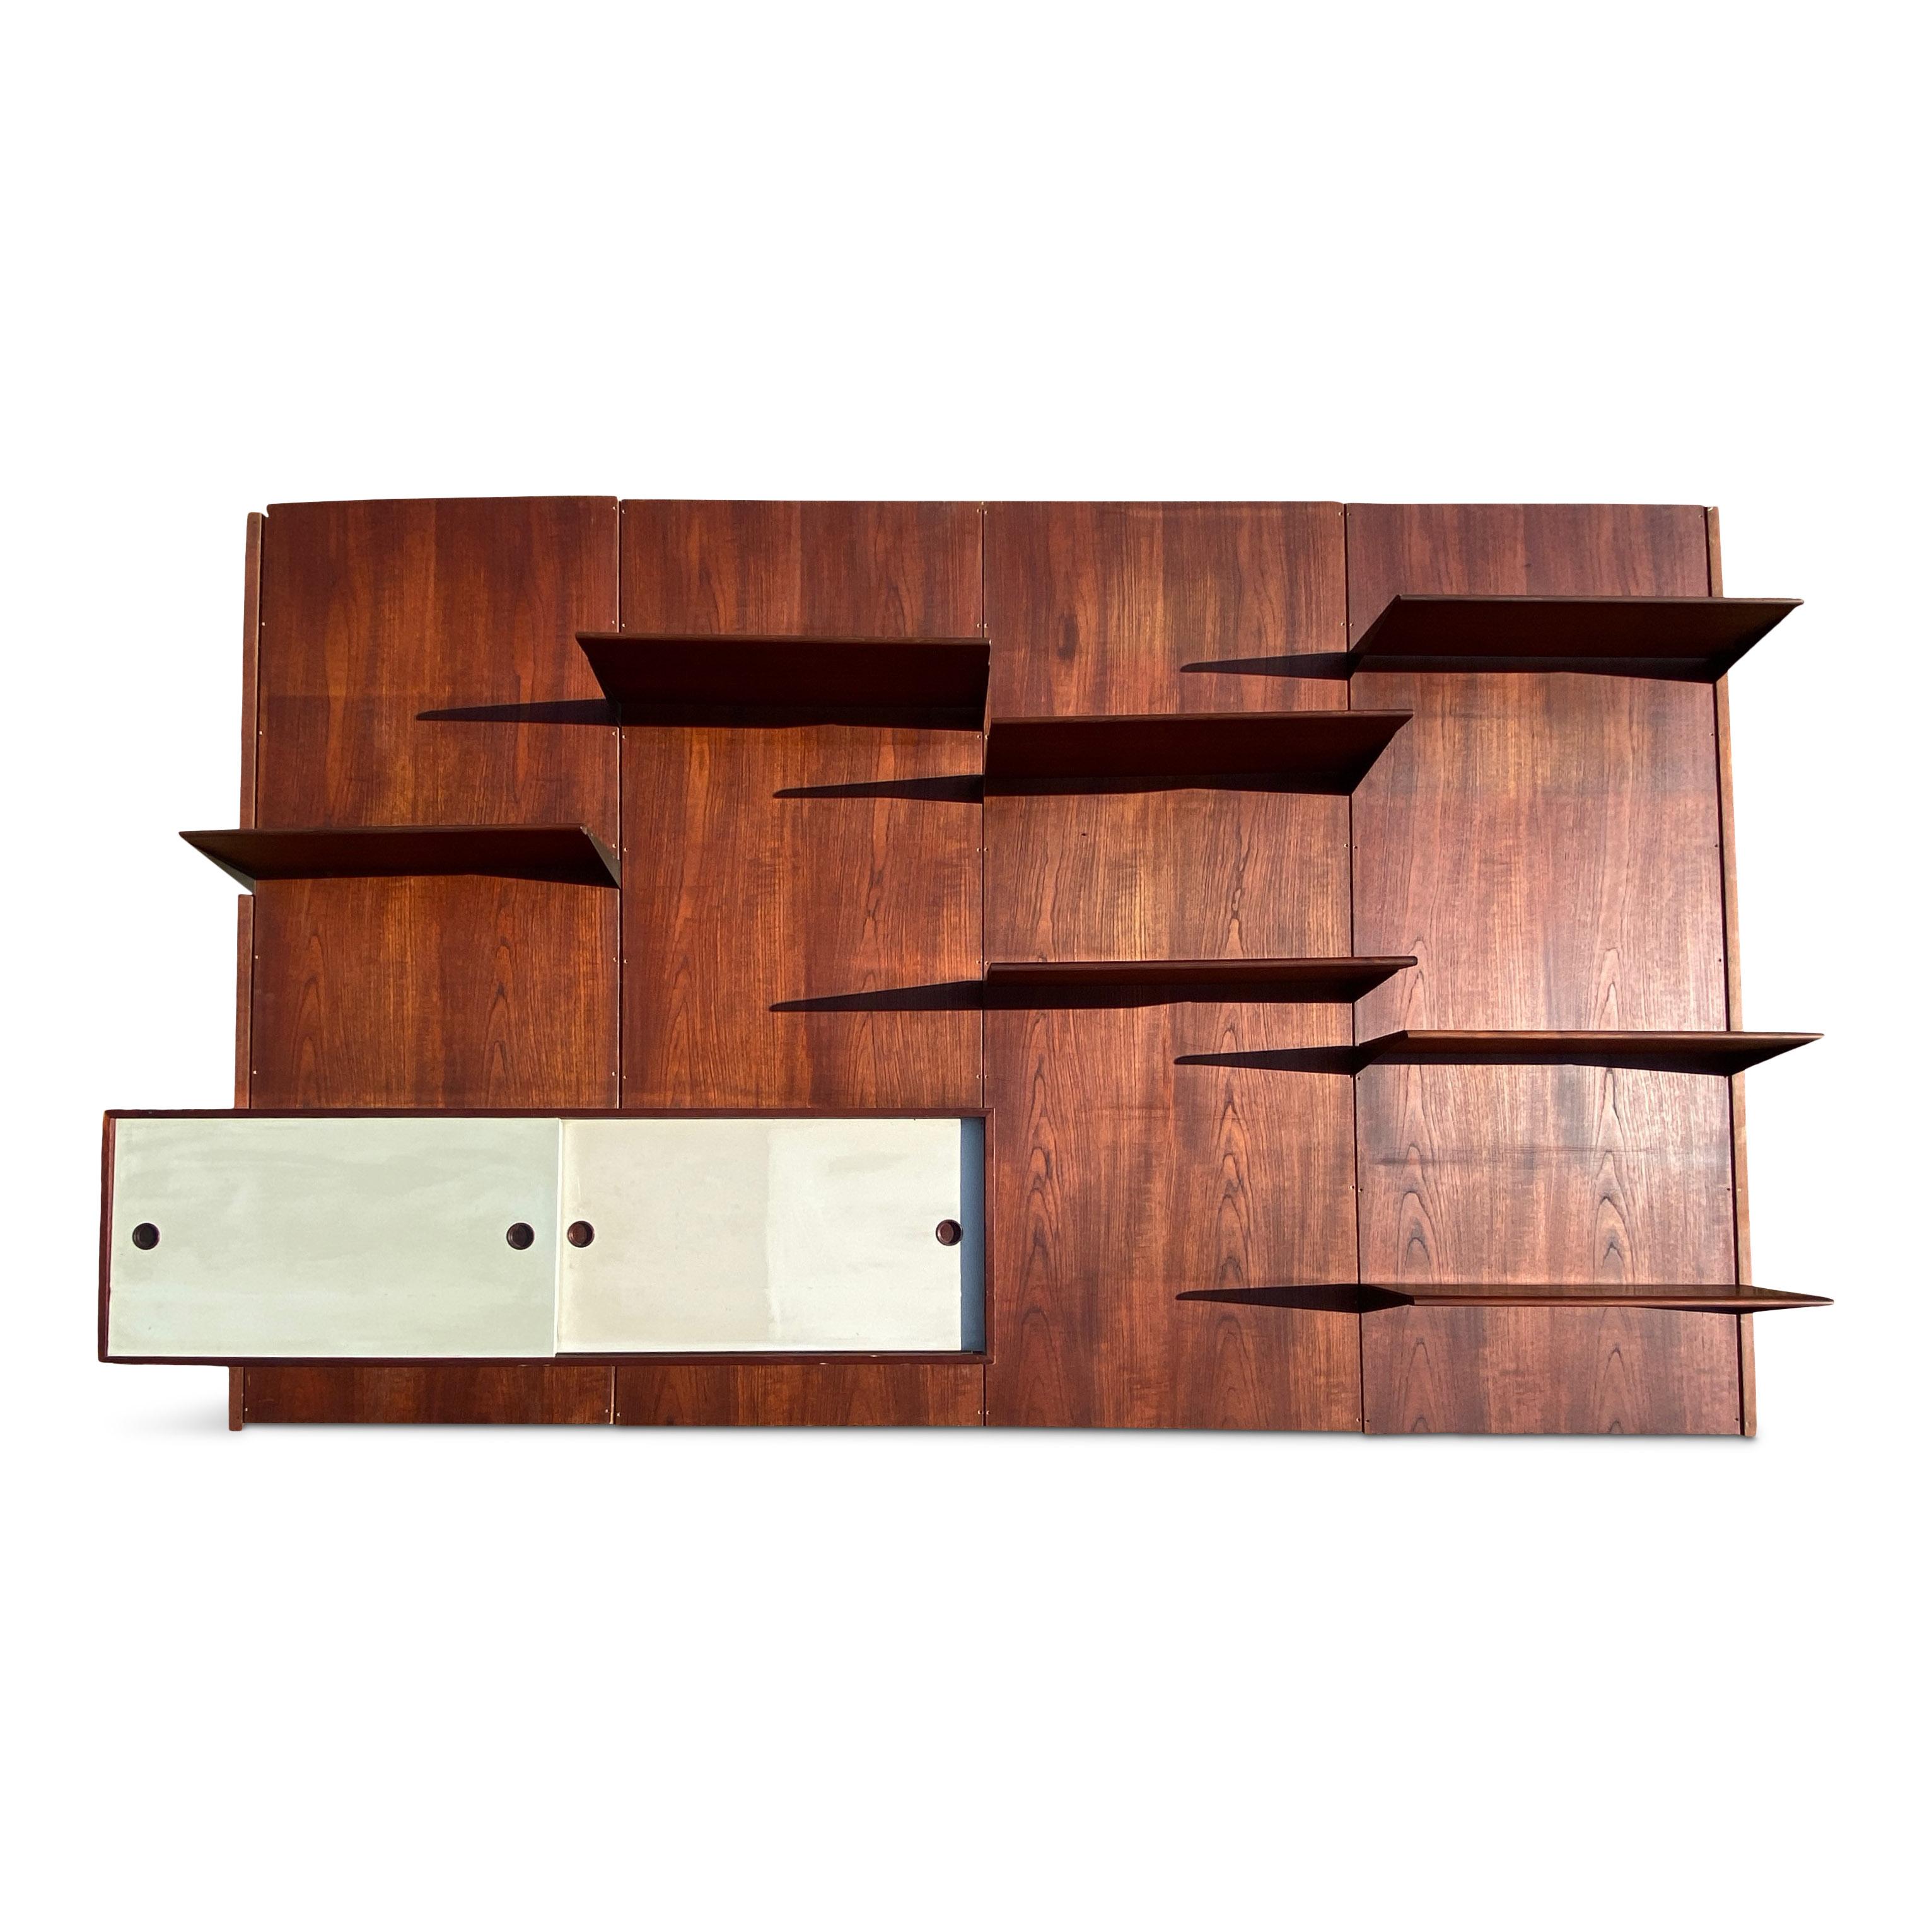 Large wall unit

By Finn Juhl for Bovirke

Teak back panels

Teak shelves with brass sides

Coloured sliding cupboard doors

Stamped with Bovirke

Denmark 1950s

The photos show the cupboards in original condition. They can be cleaned